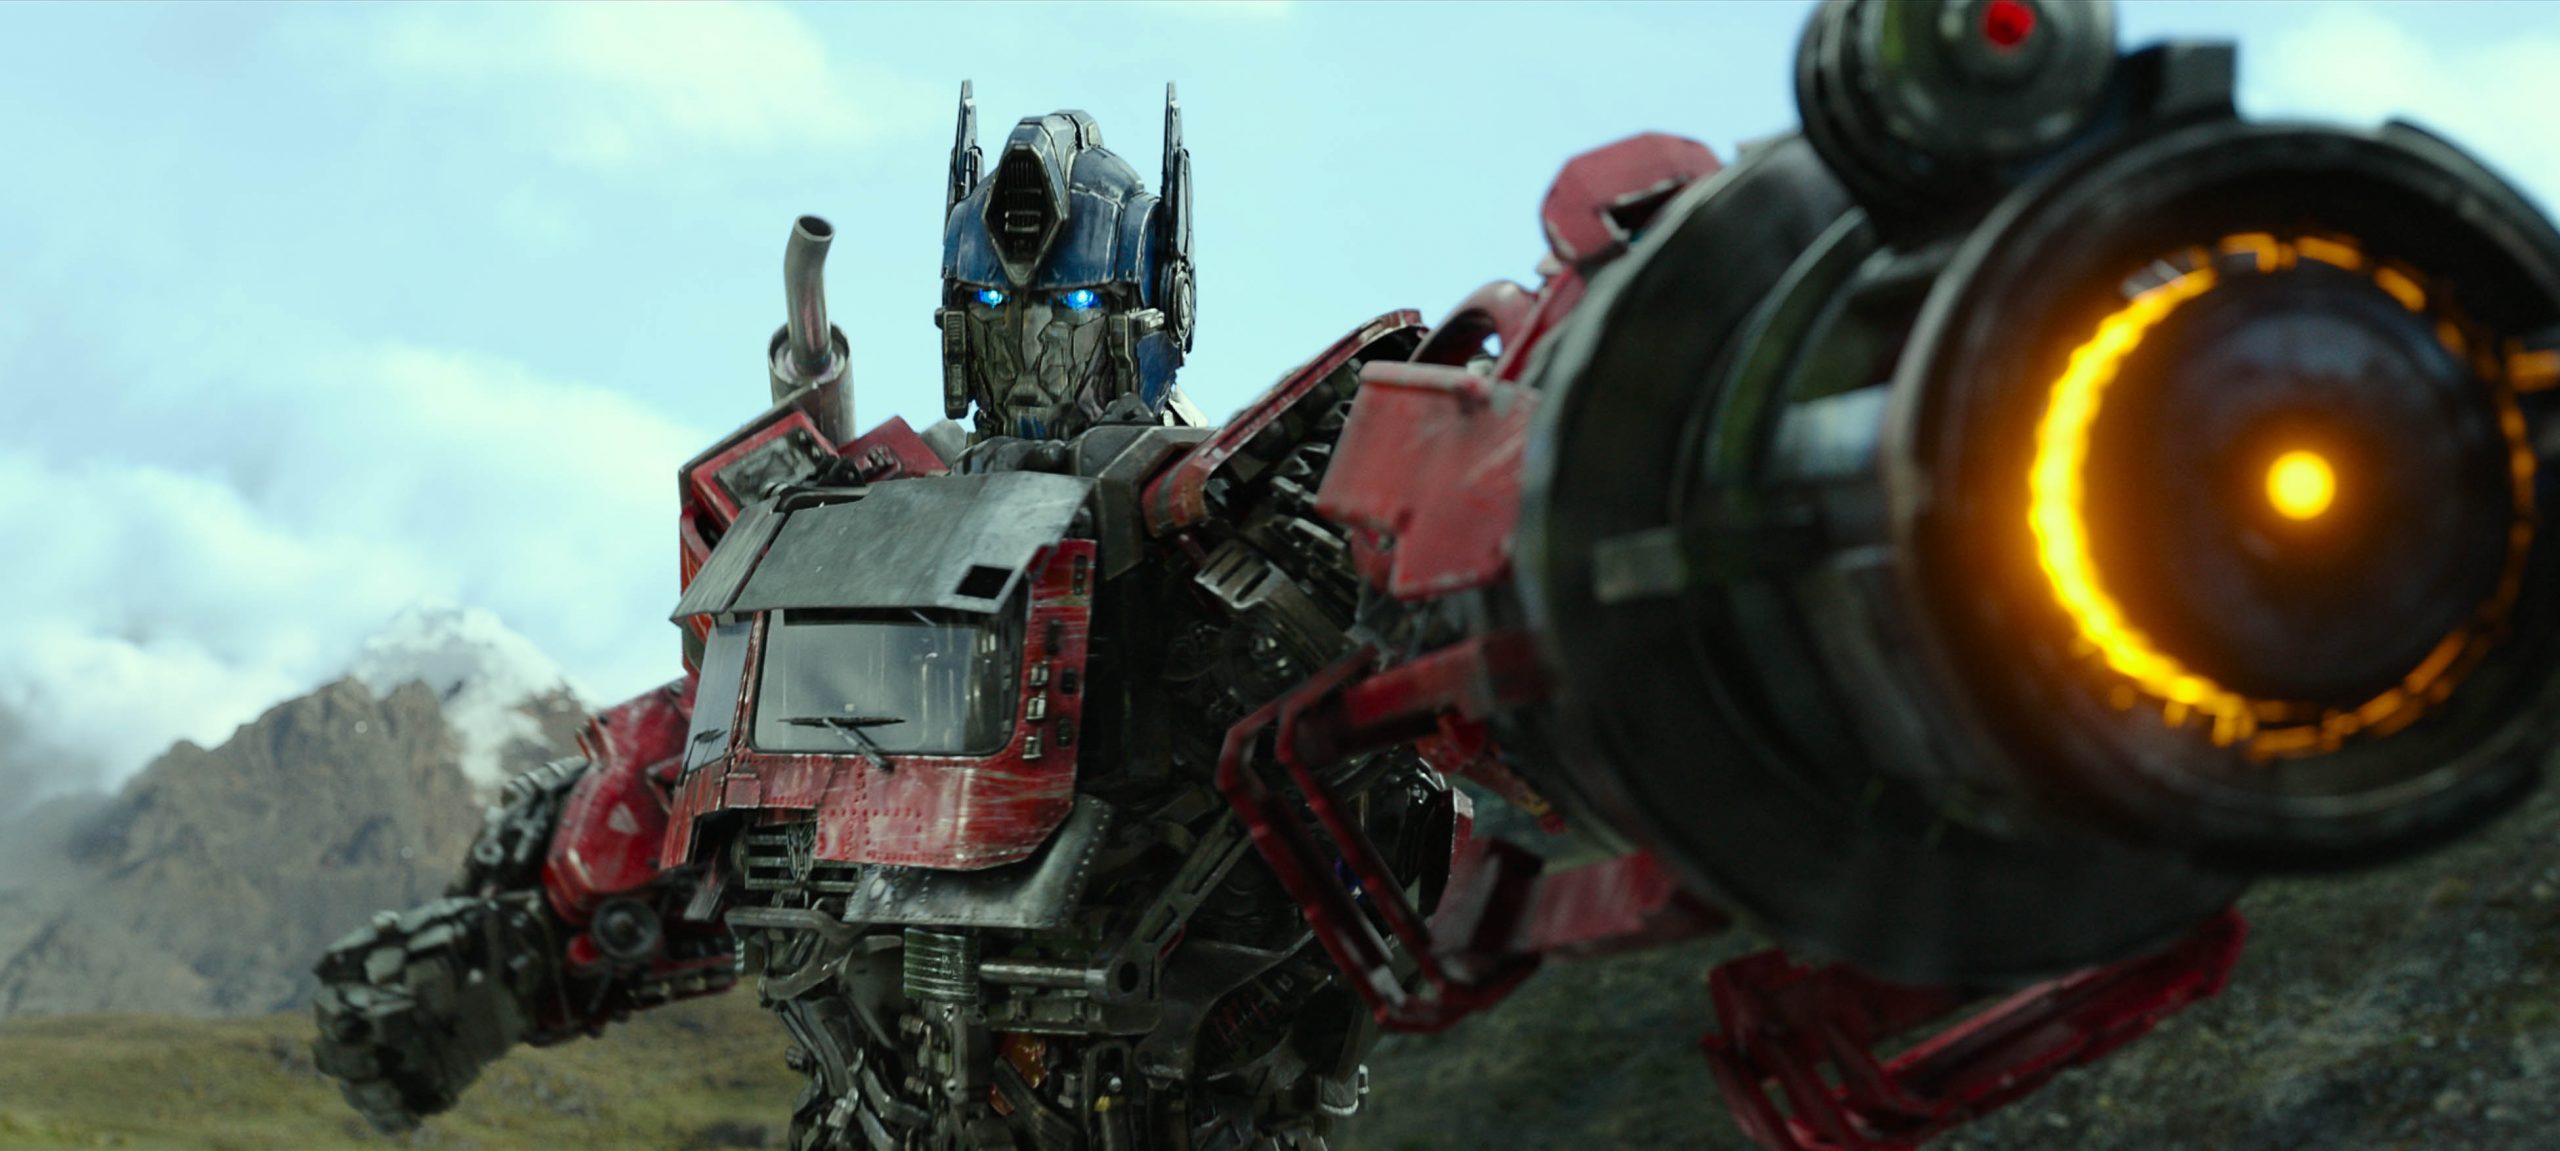 Trivia Transformer Rise Of The Beasts Optimus Prime in PARAMOUNT PICTURES and SKYDANCE Present In Association with HASBRO and NEW REPUBLIC PICTURES A di BONAVENTURA PICTURES Production A TOM DESANTO / DON MURPHY Production A BAY FILMS Production “TRANSFORMERS: RISE OF THE BEASTS”